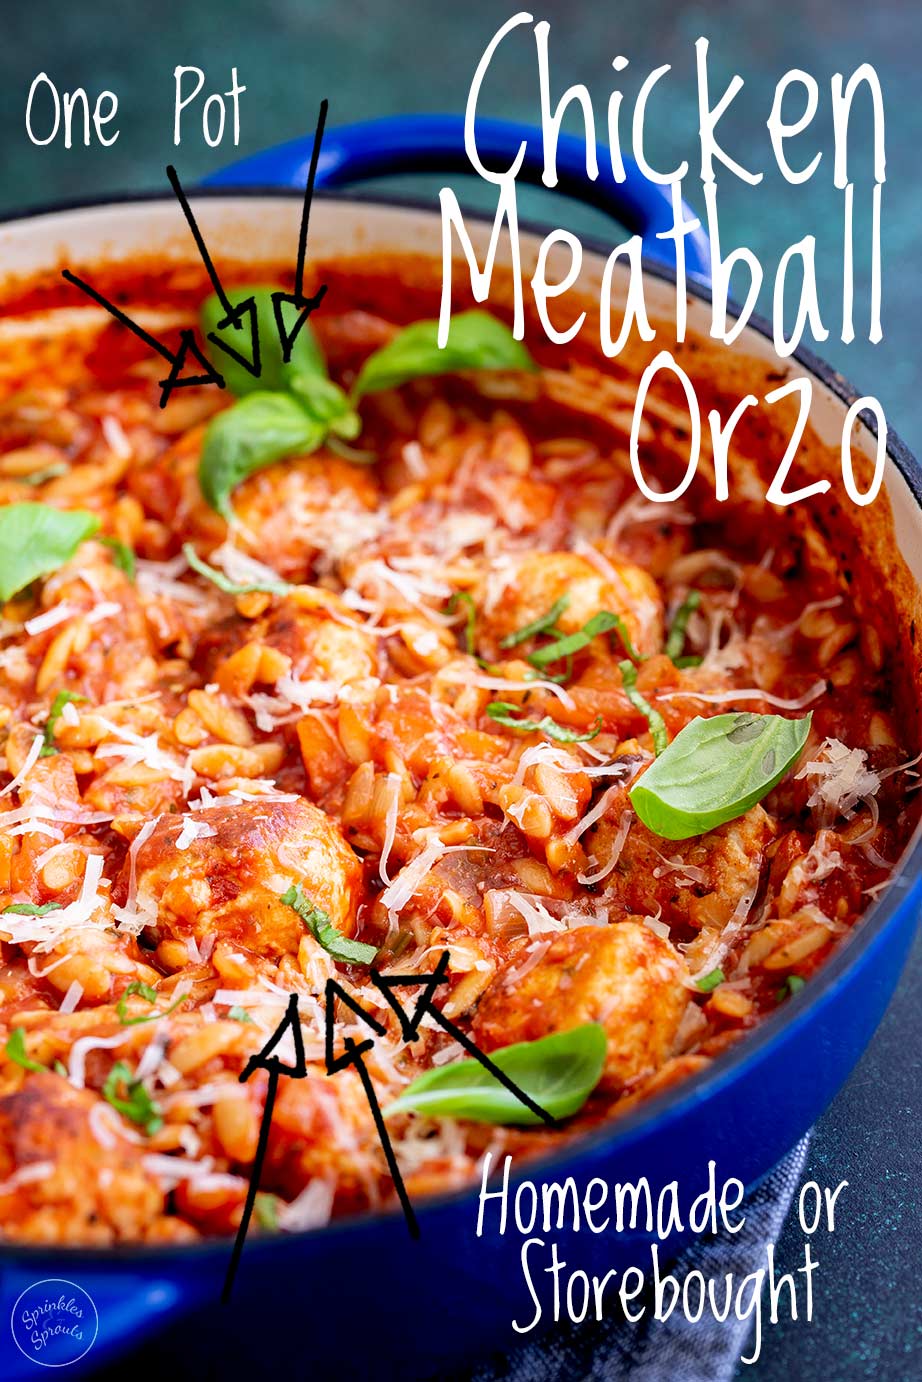 meatball orzo with text in the top right